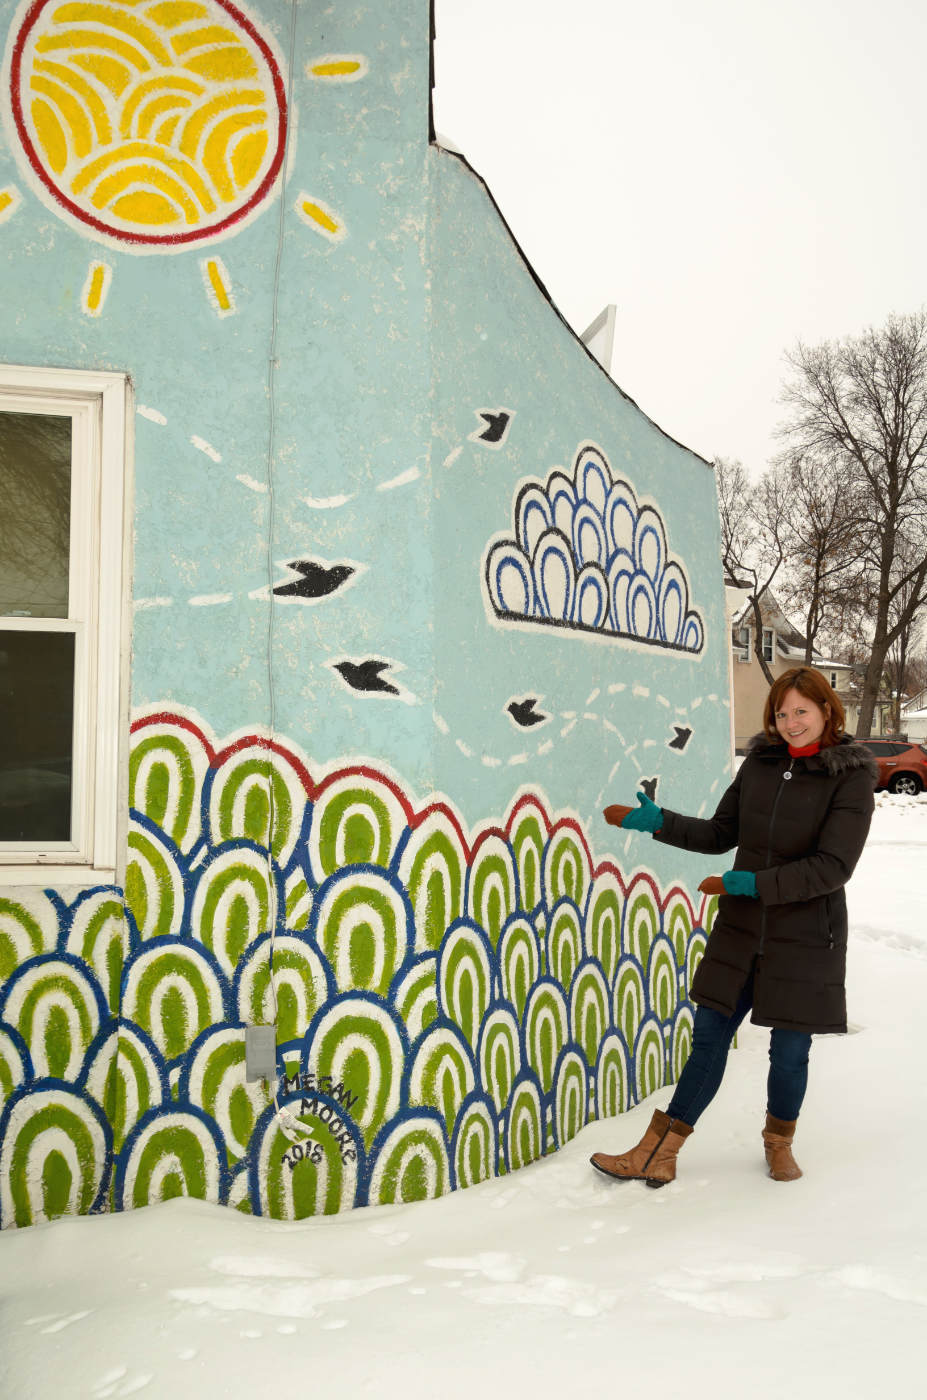 woman standing next to a single story building with a mural of an abstract landscape with a field of green globe shapes with bird silhouettes flying in a blue sky under a yellow sun